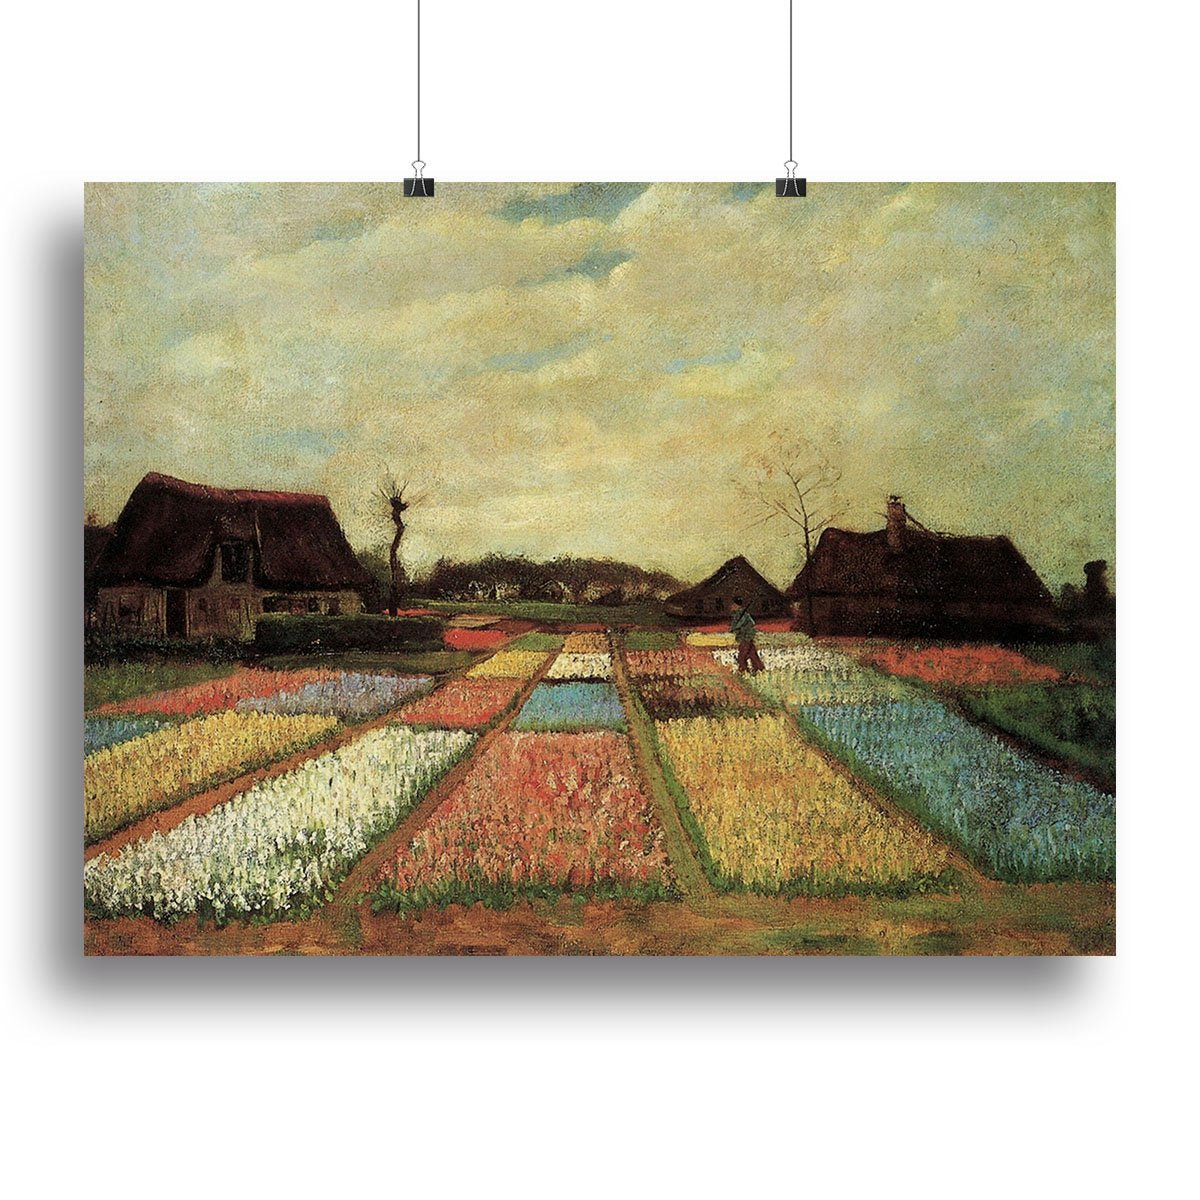 Bulb Fields by Van Gogh Canvas Print or Poster